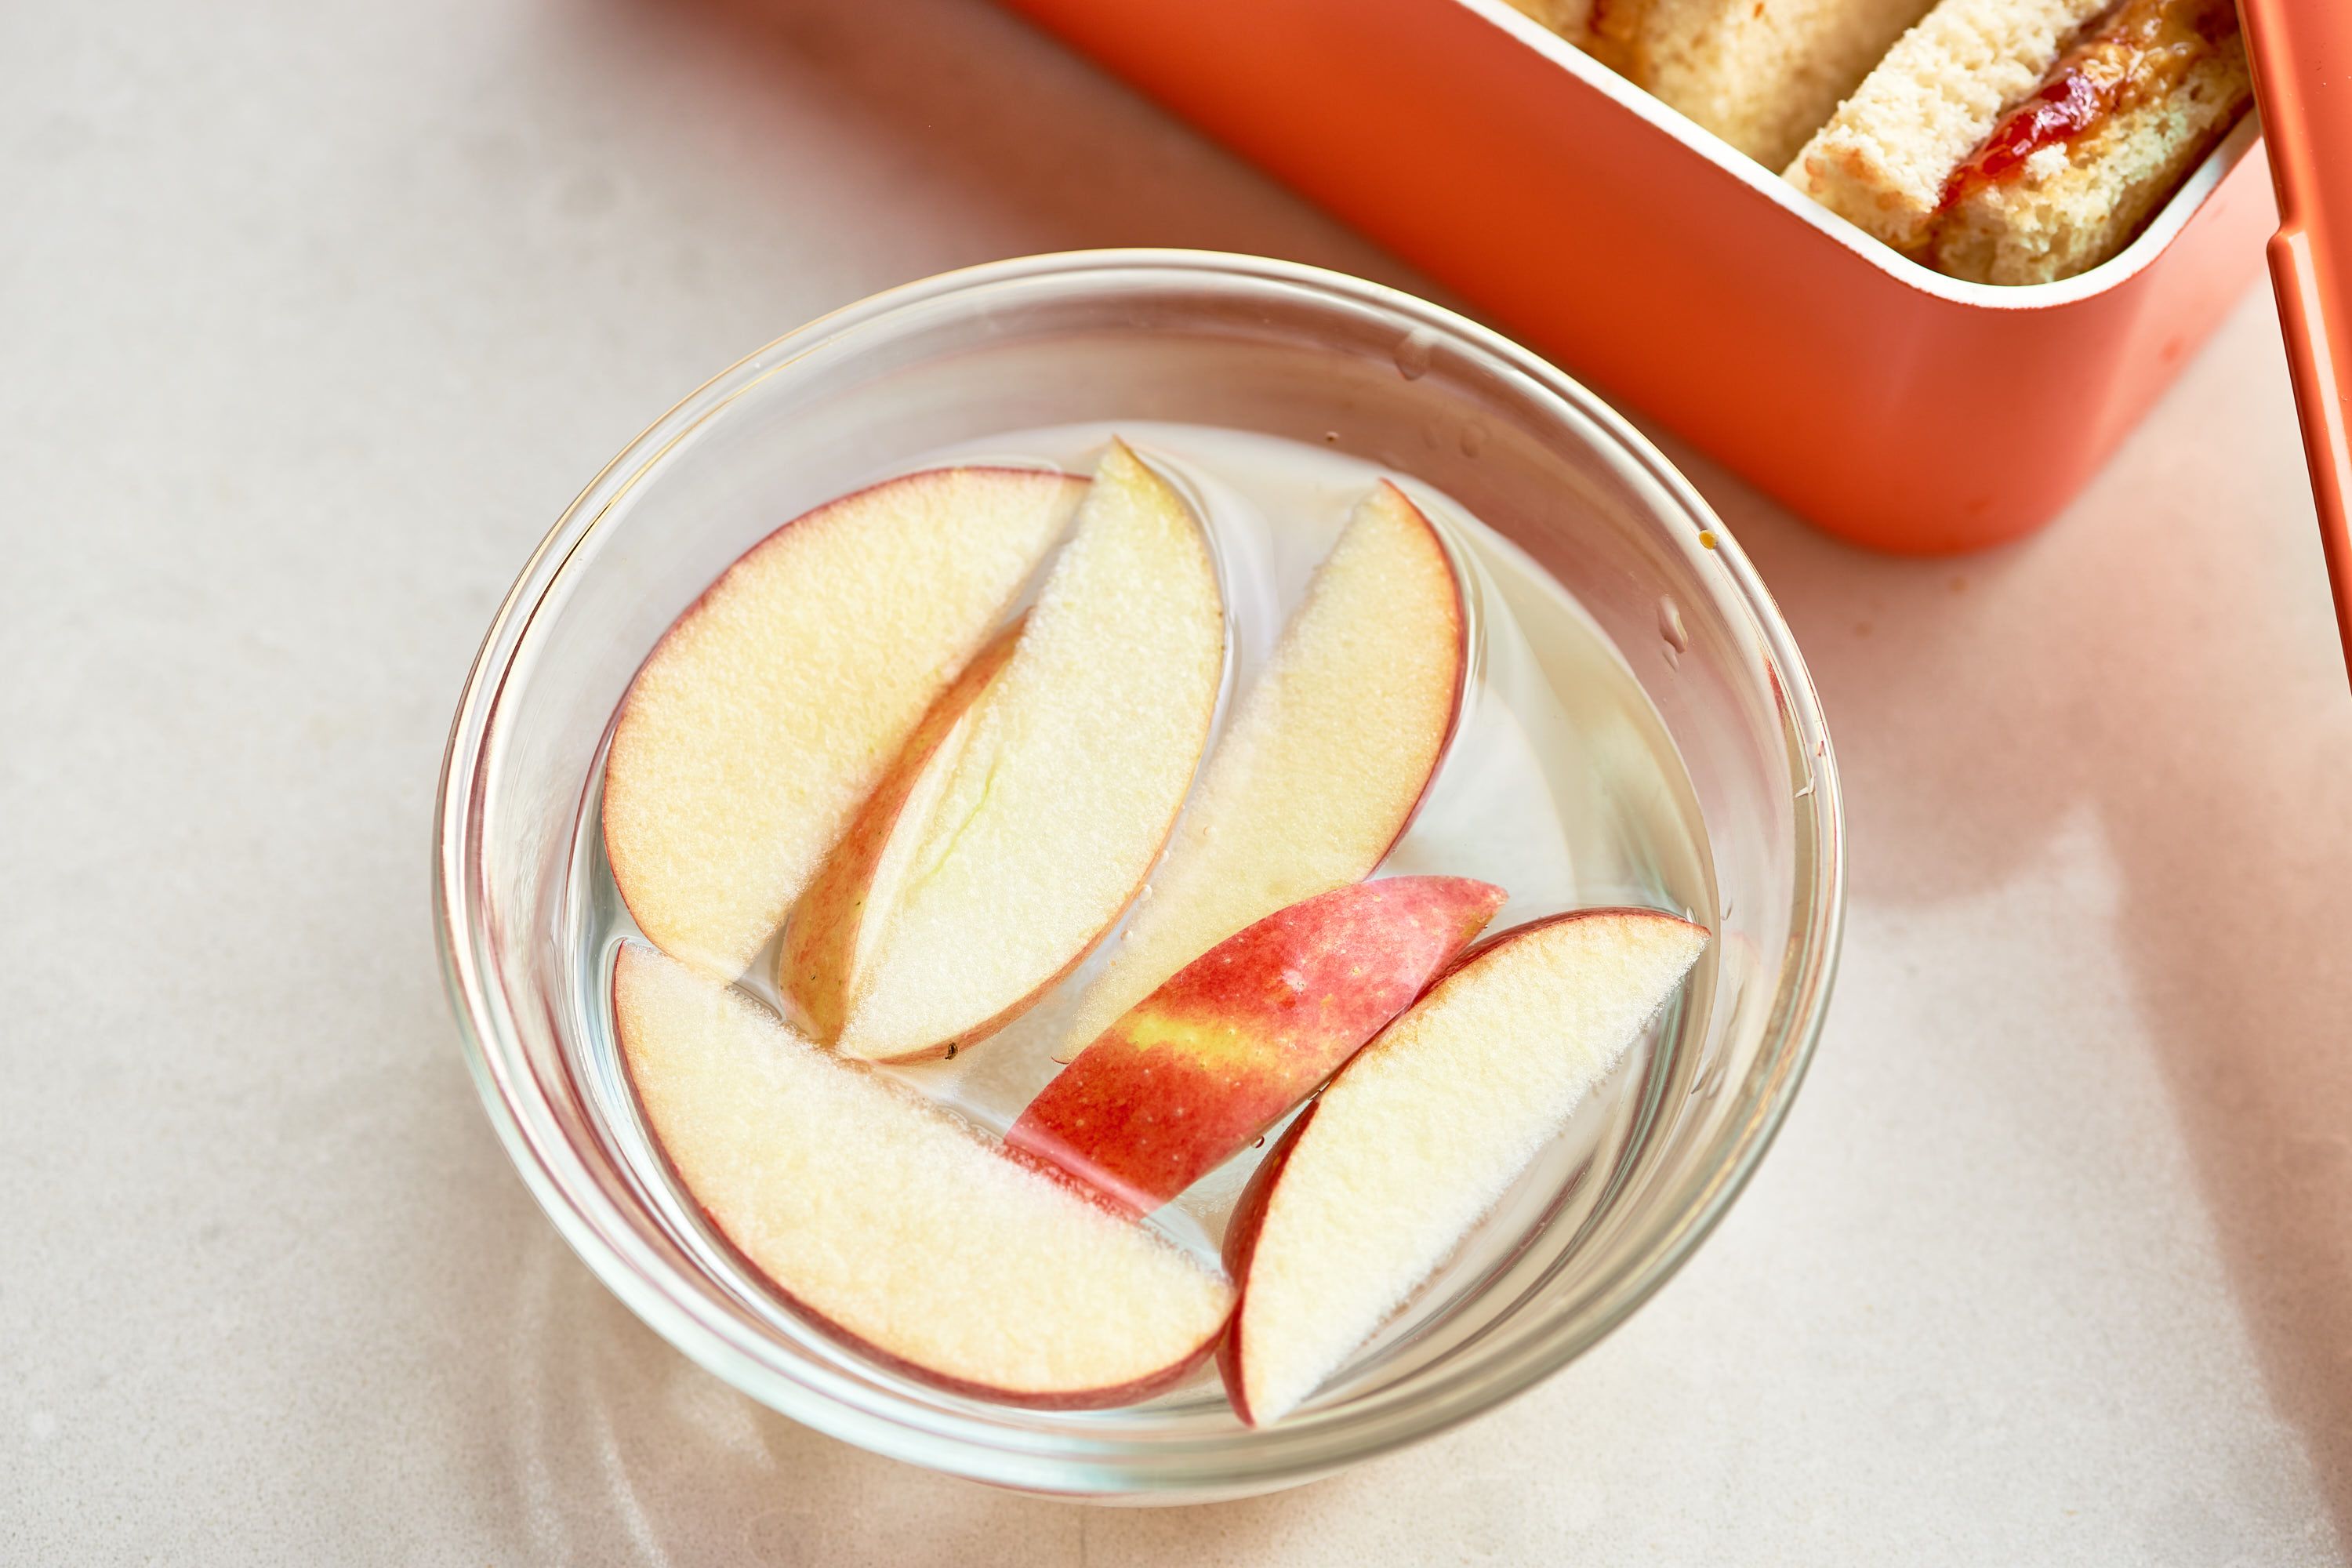 How To Keep Apples From Turning Brown In Lunch Box